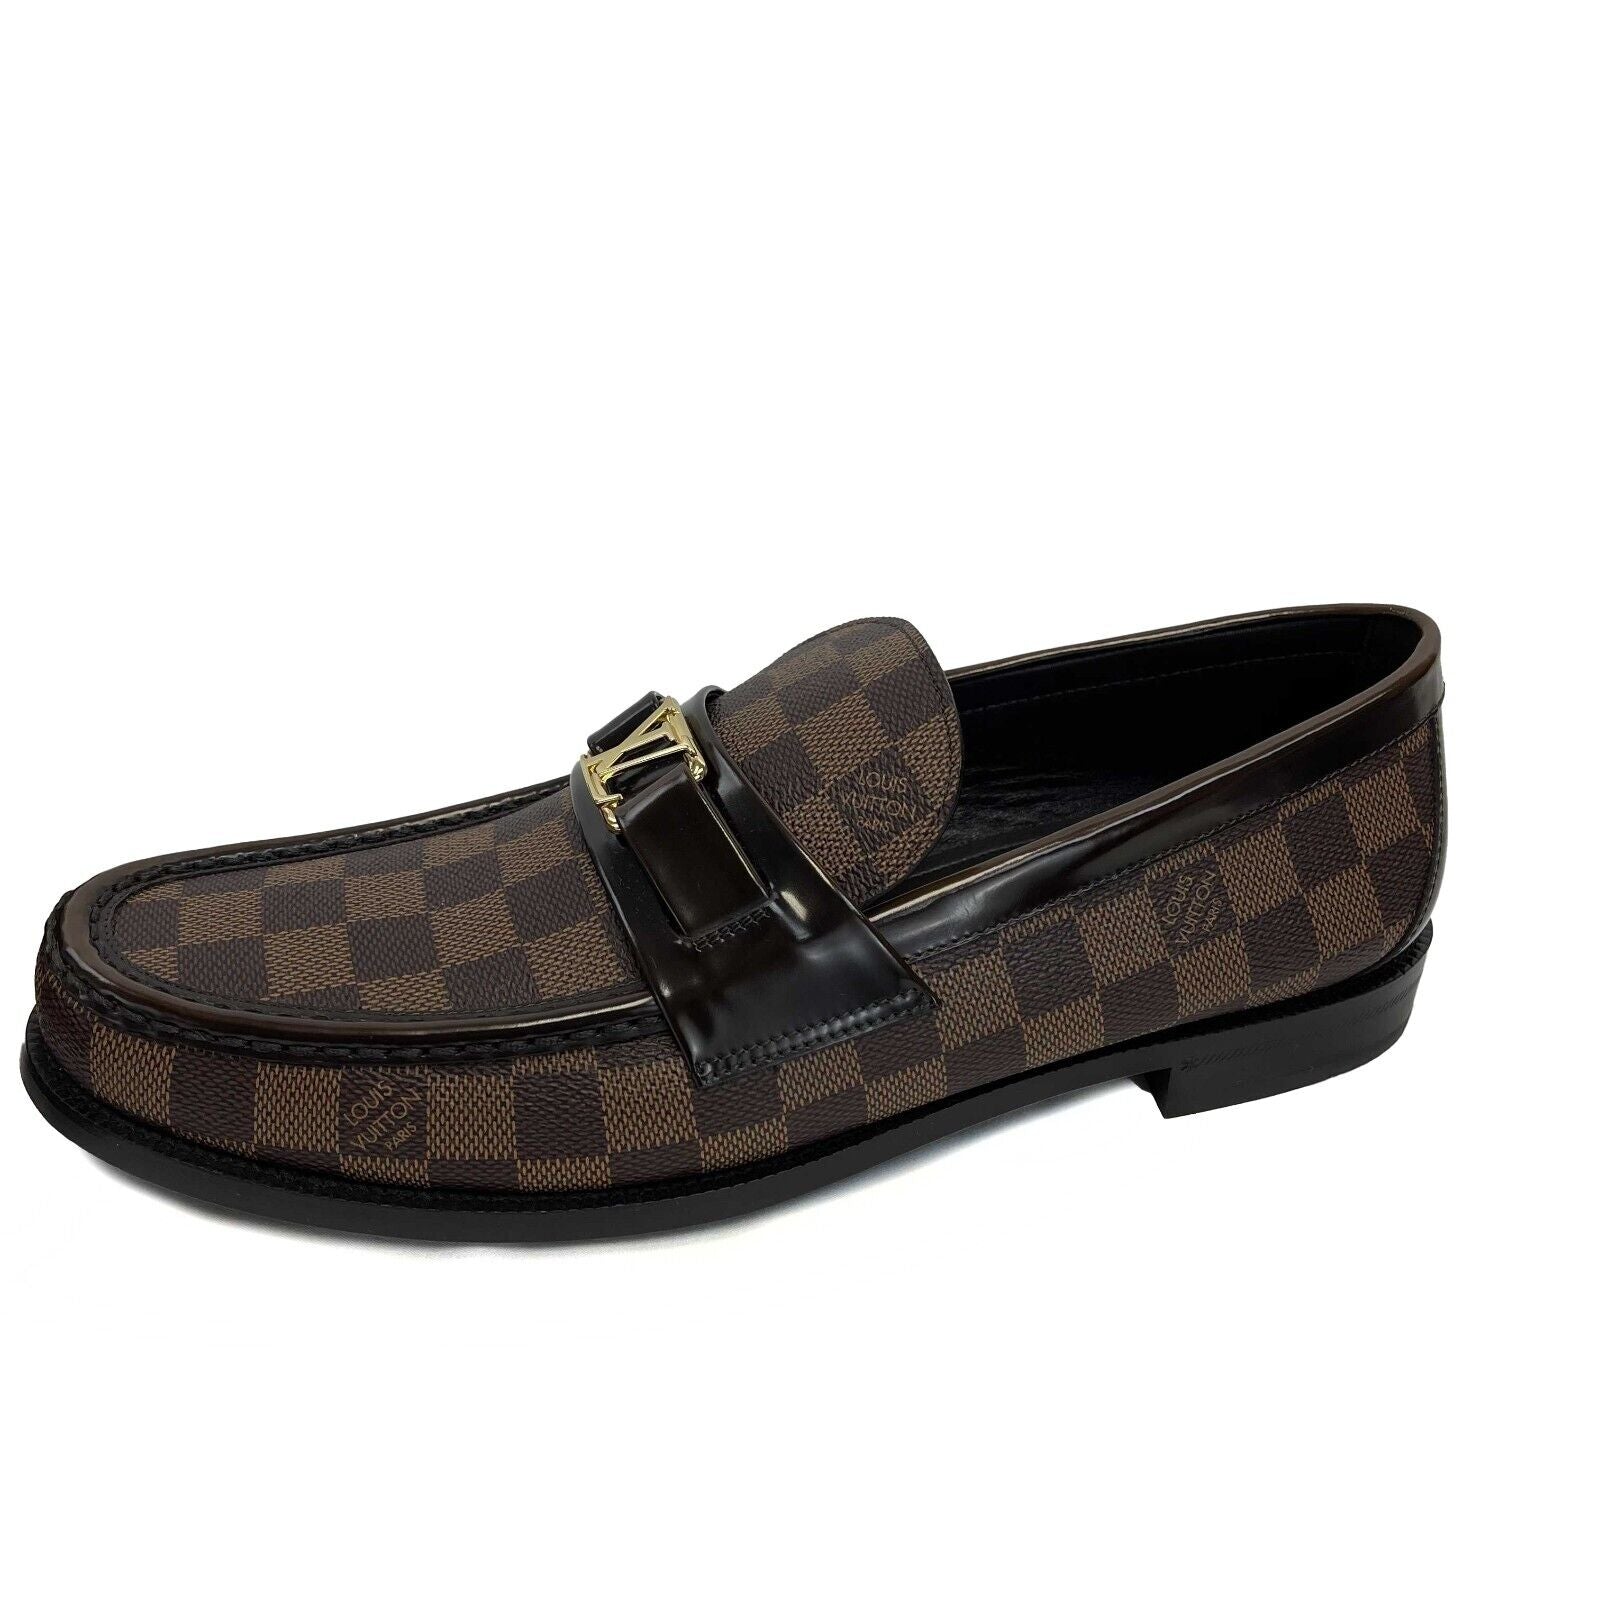 Louis Vuitton Major Loafer BROWN. Size 08.0